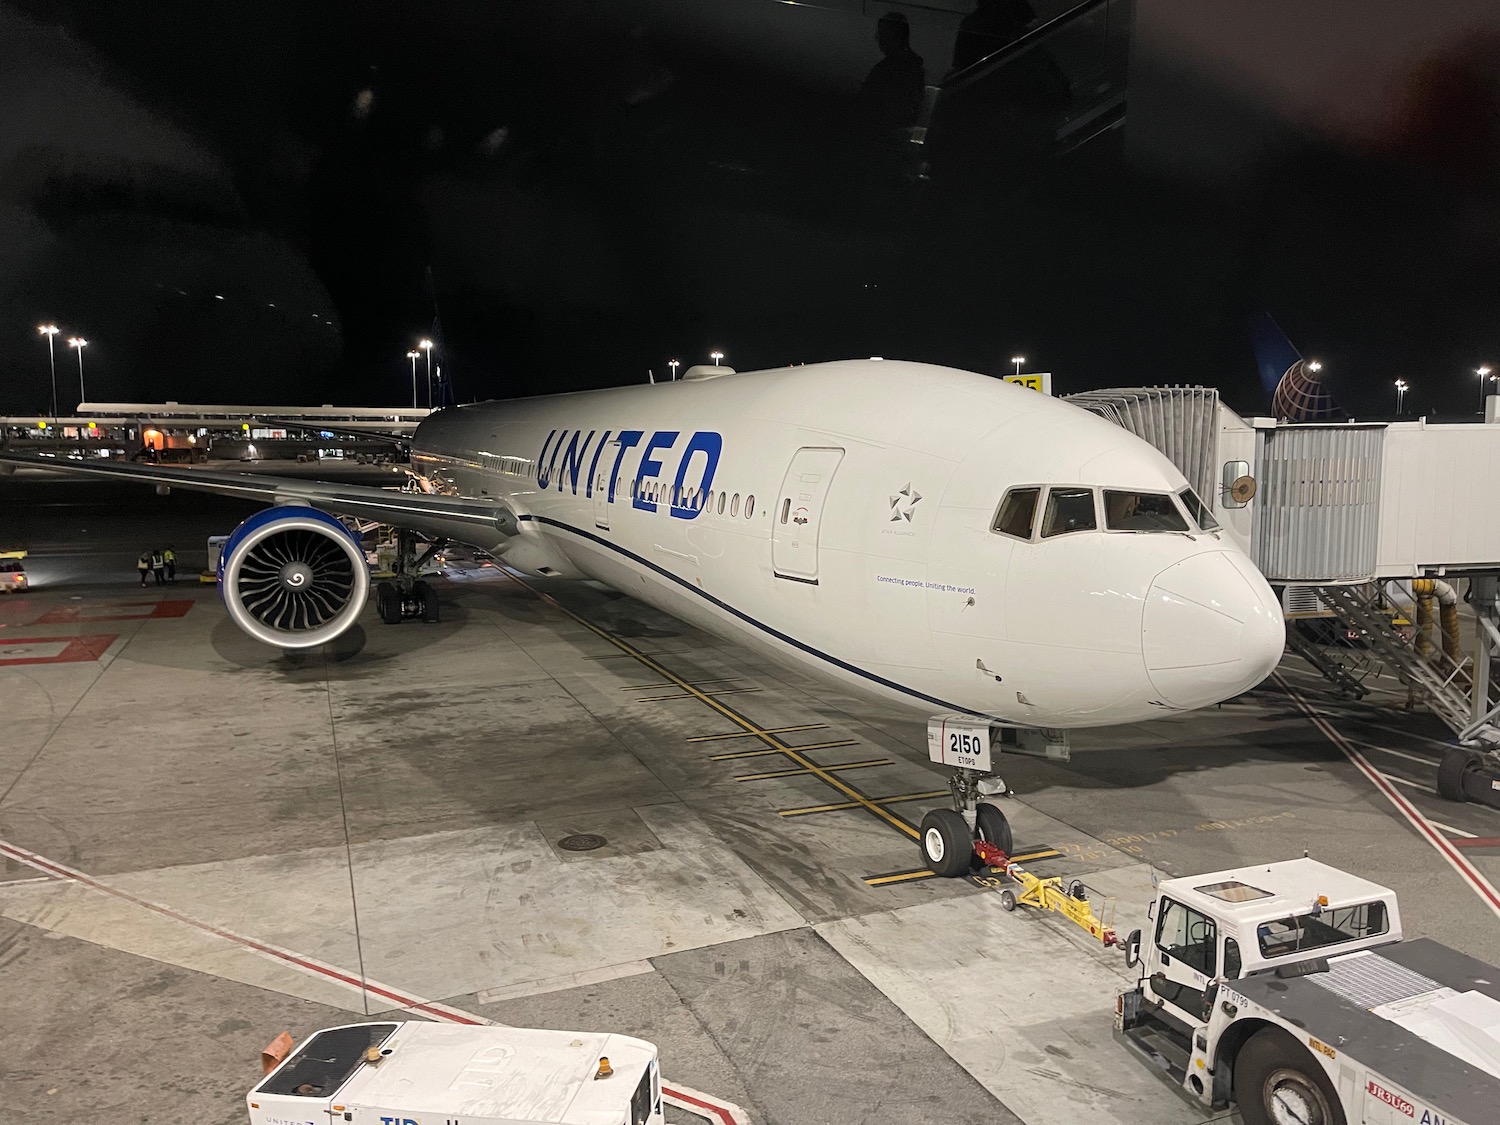 a plane parked at an airport